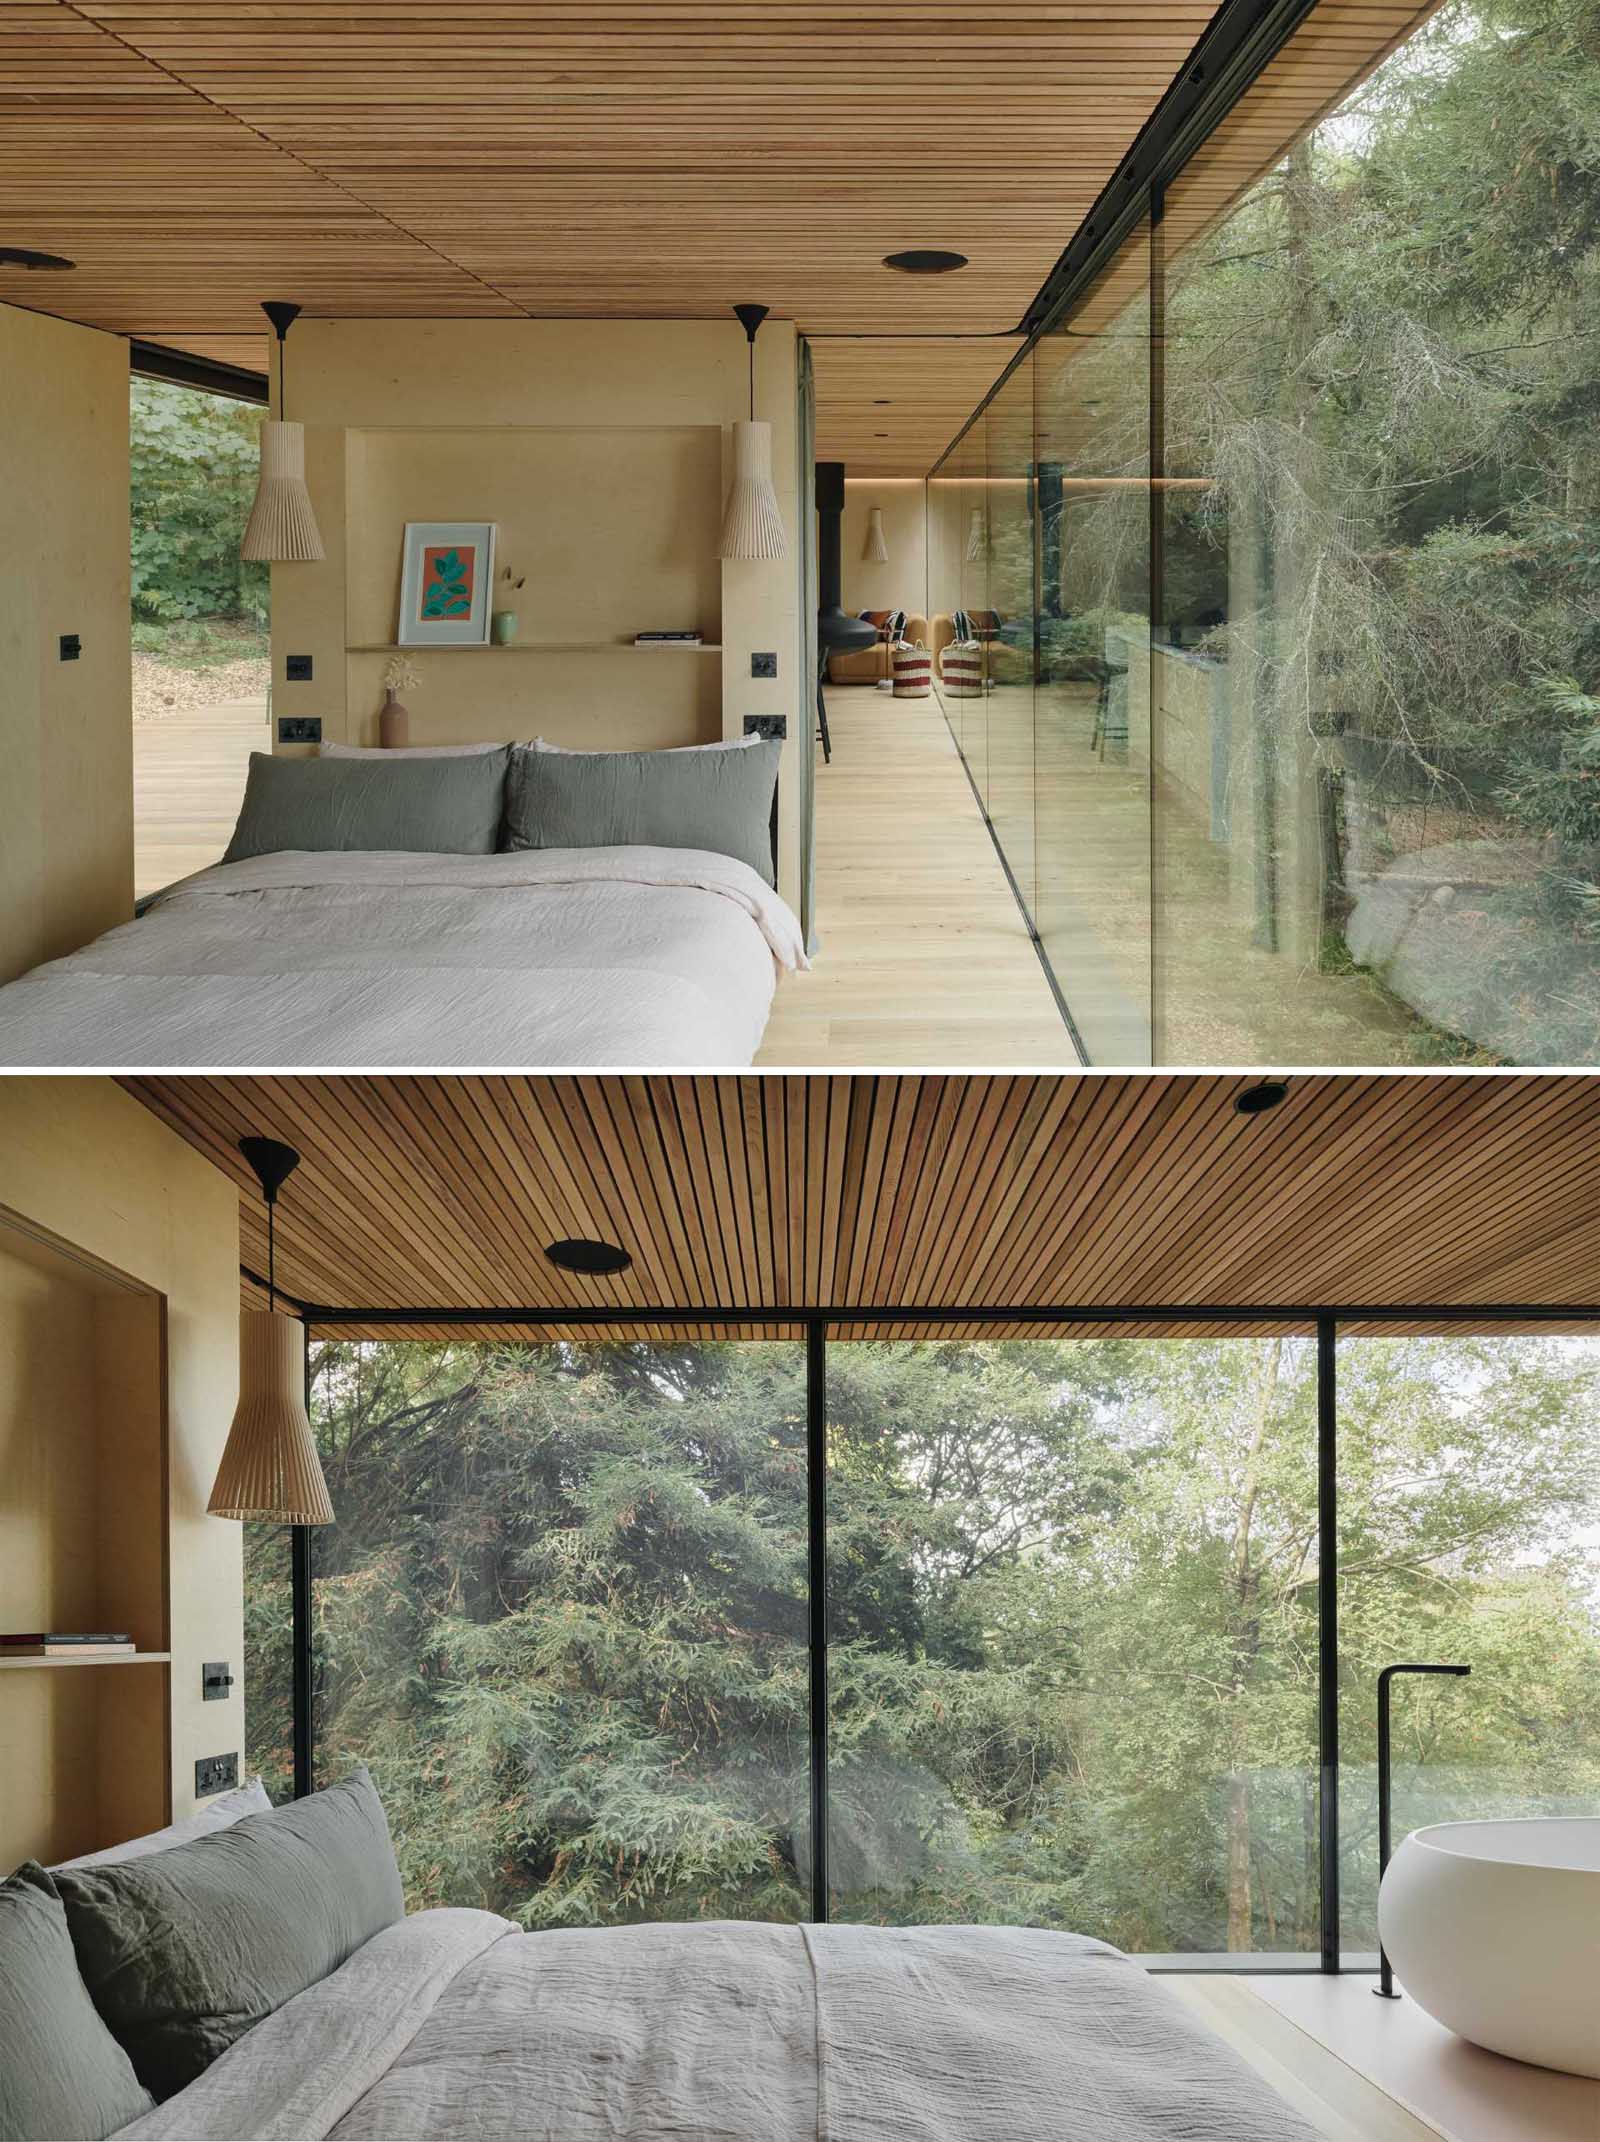 Glass walls and the wood ceiling connect the kitchen to the bedroom in this small home.